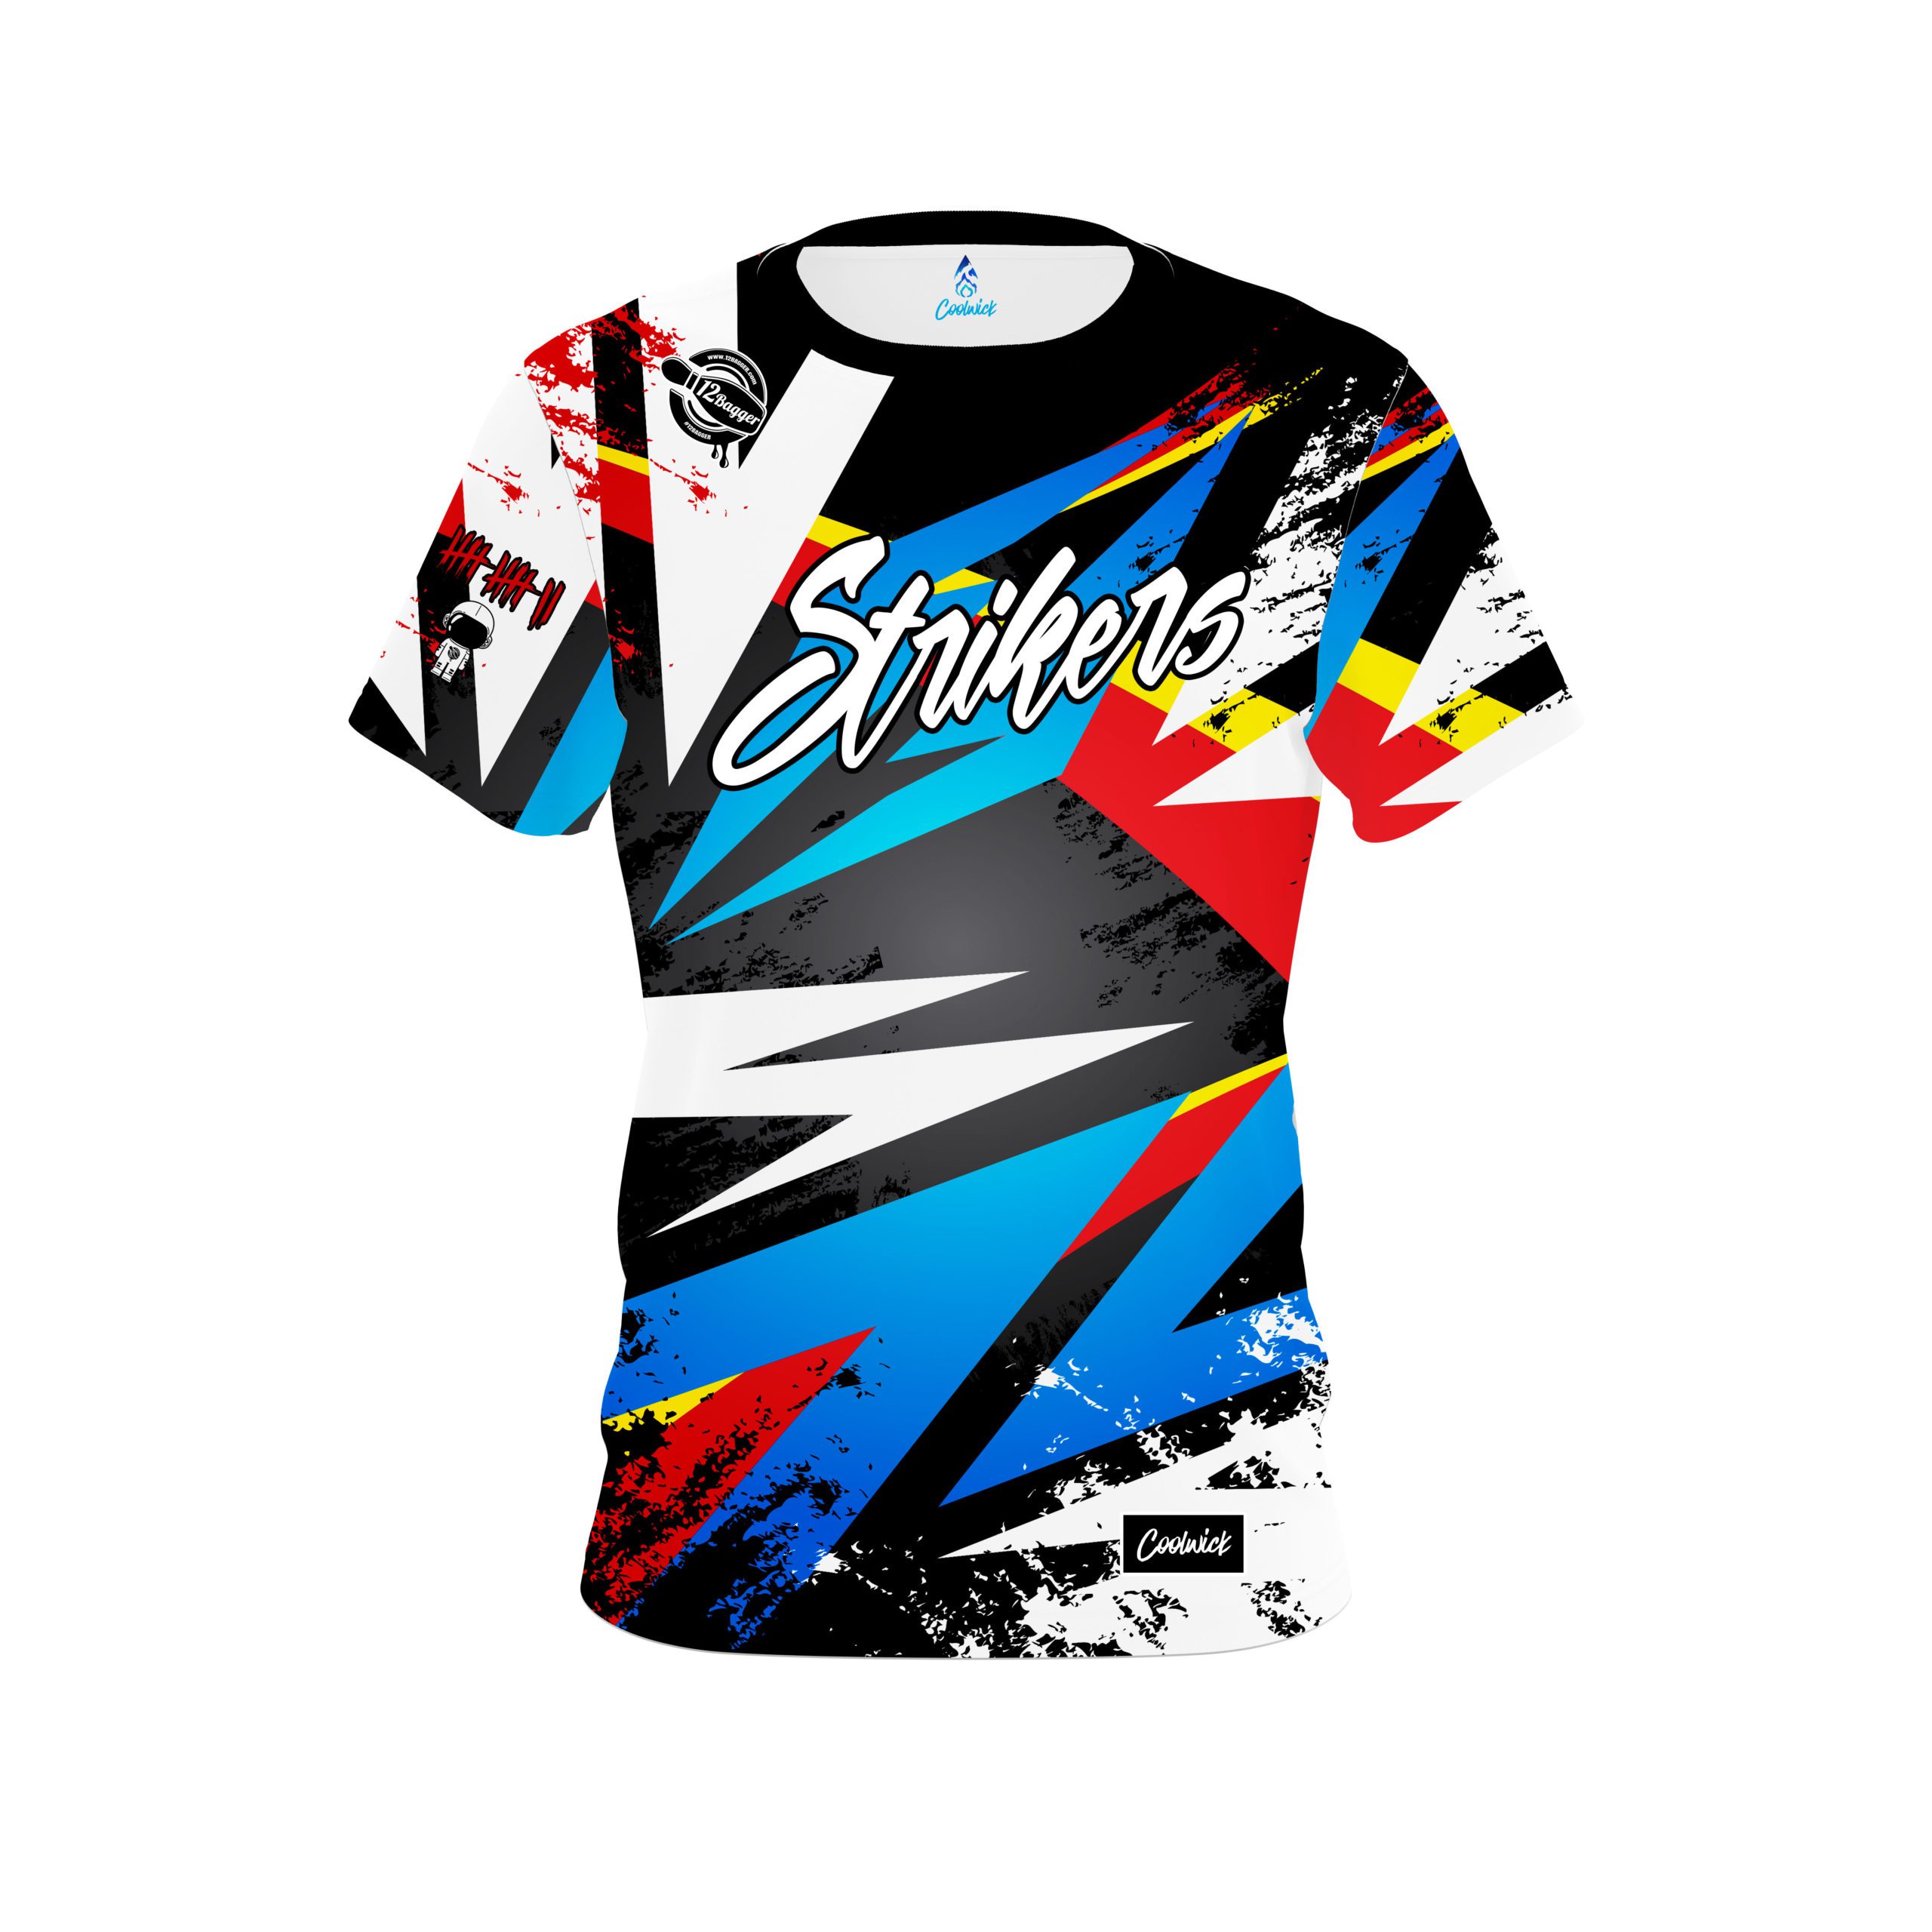 12Bagger x Strikers in The Empire Bowling Jersey